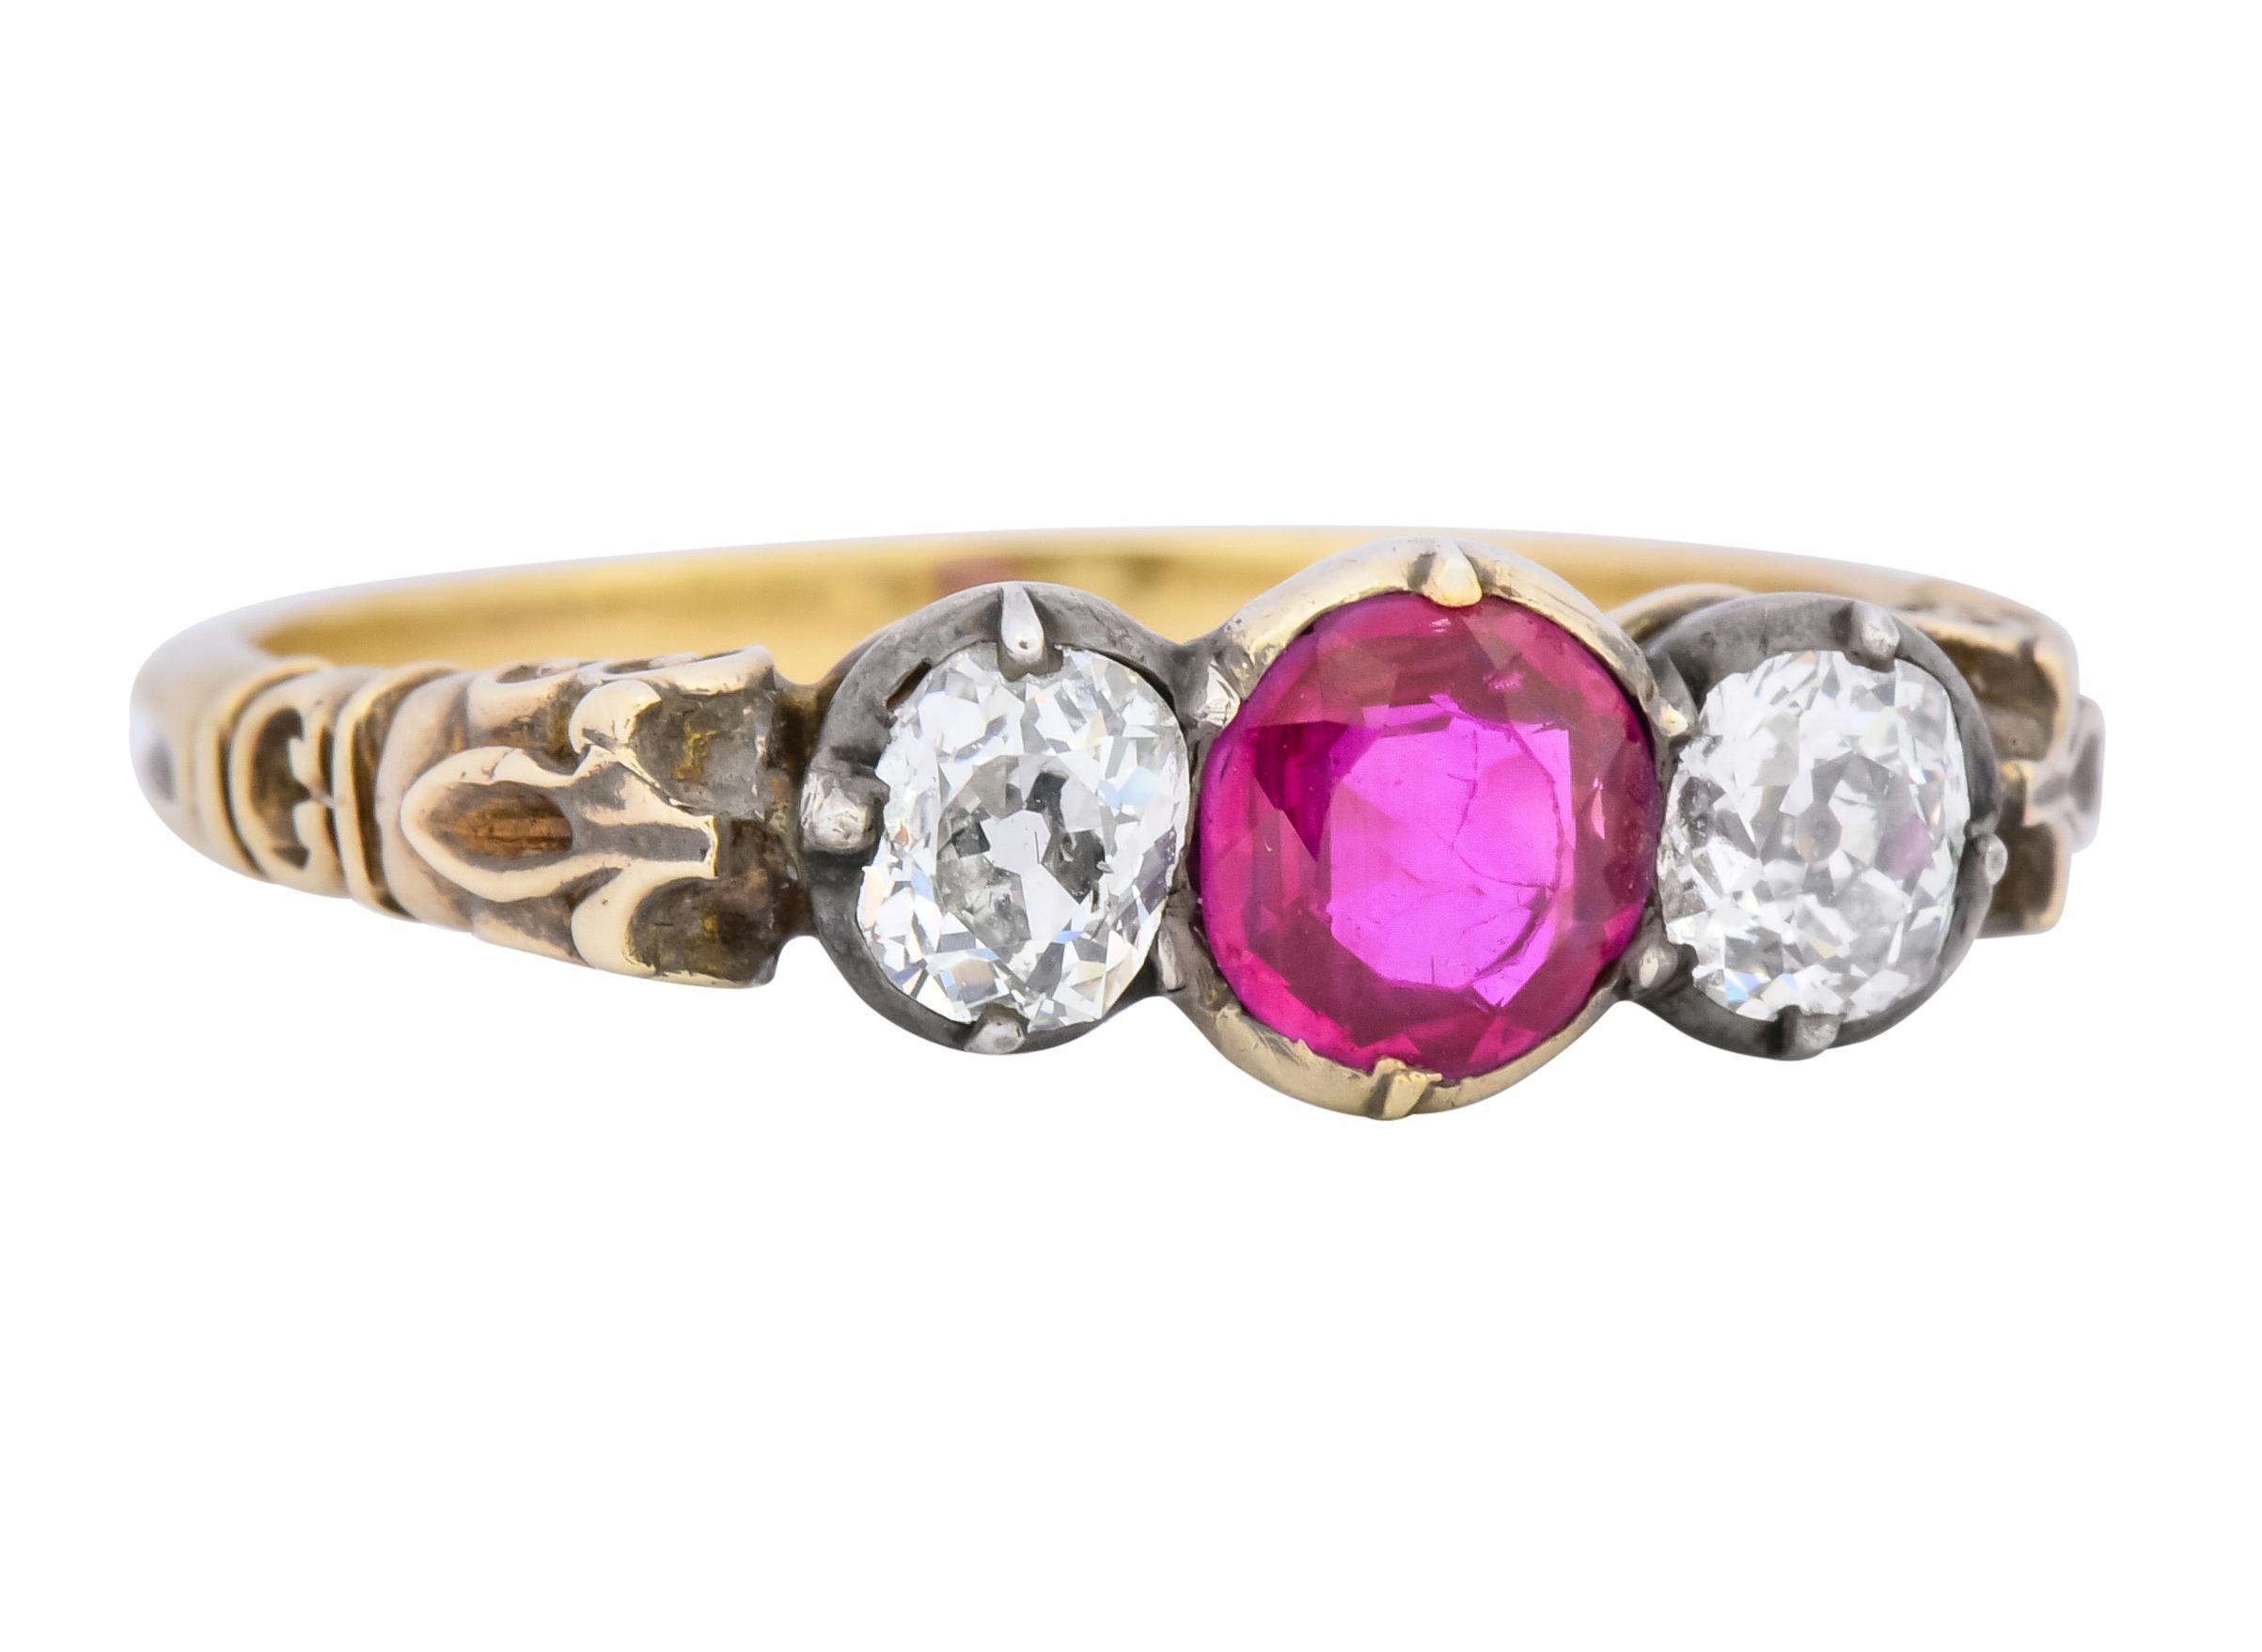 Old Mine Cut Victorian Diamond Ruby Silver-Topped 14 Karat Gold Three-Stone Ring For Sale